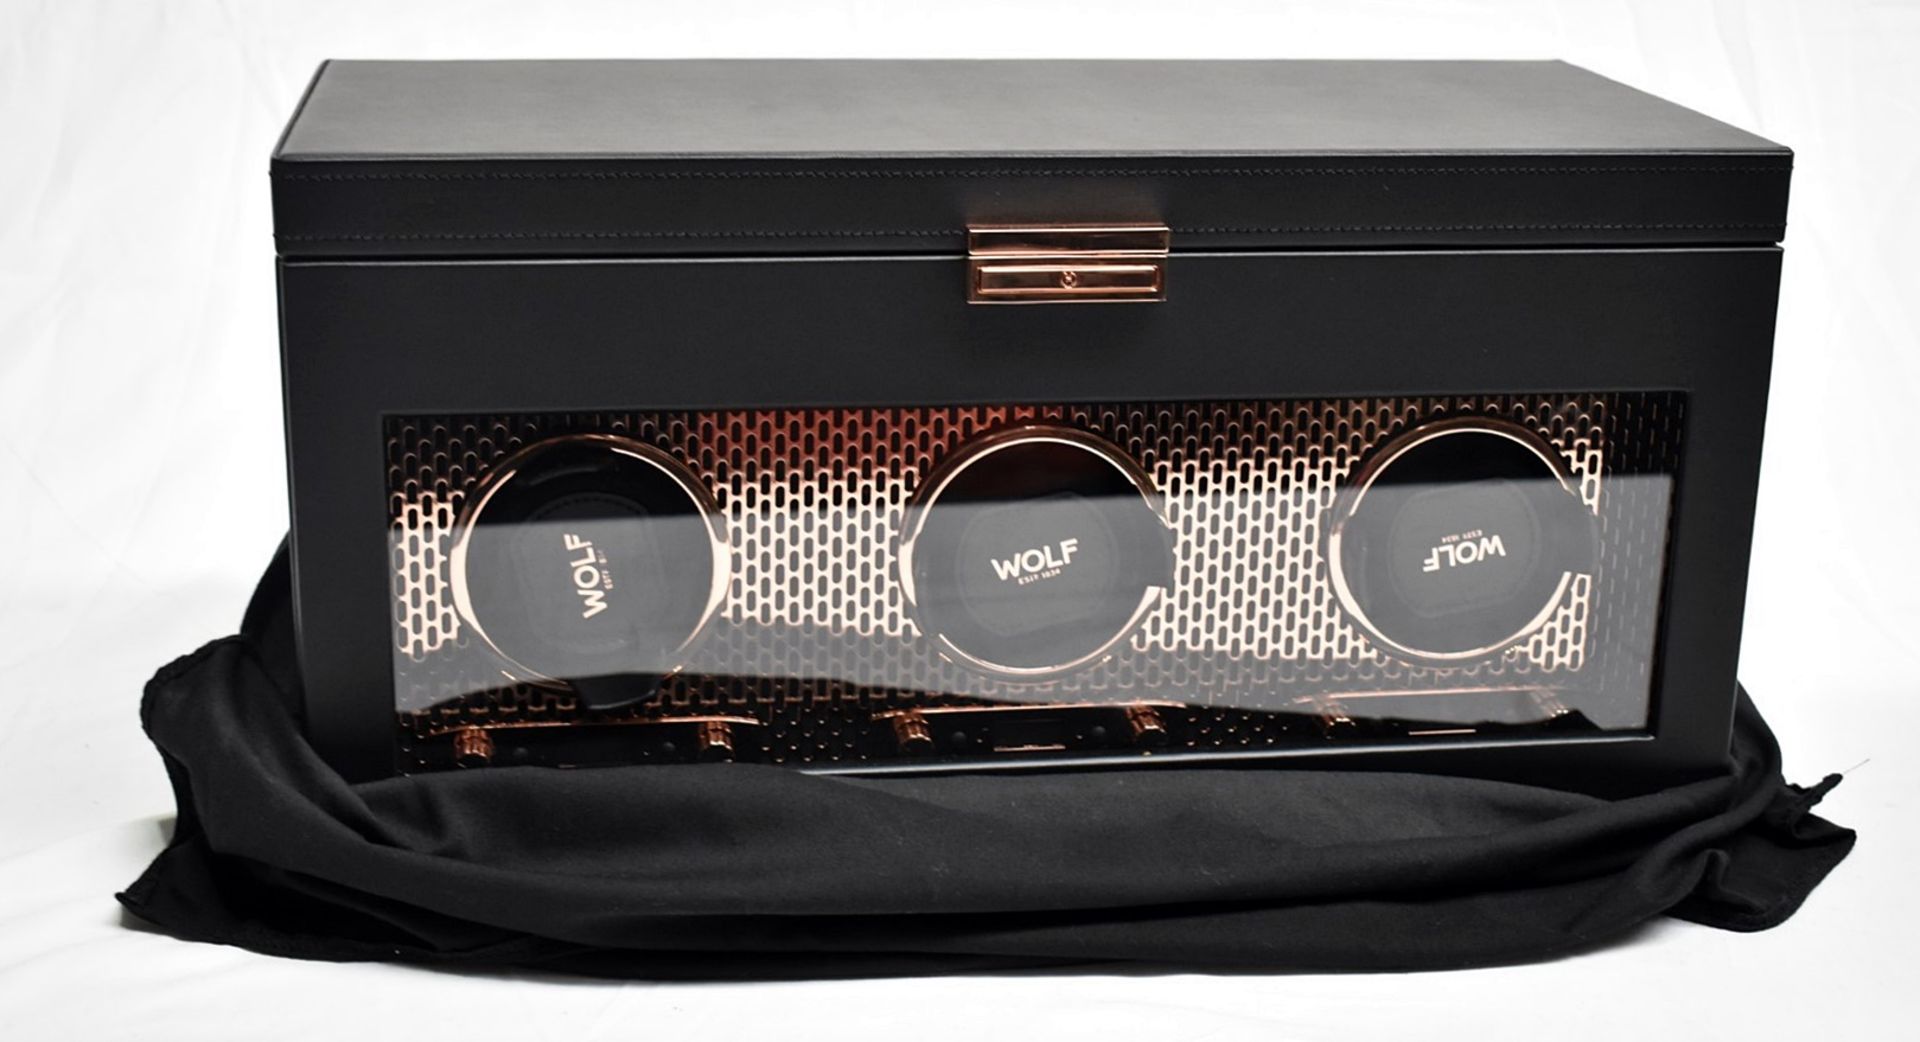 1 x WOLF 'Axis' Luxury Triple Watch Winder With Storage - Original Price £1,809 - Unused Boxed Stock - Image 15 of 32